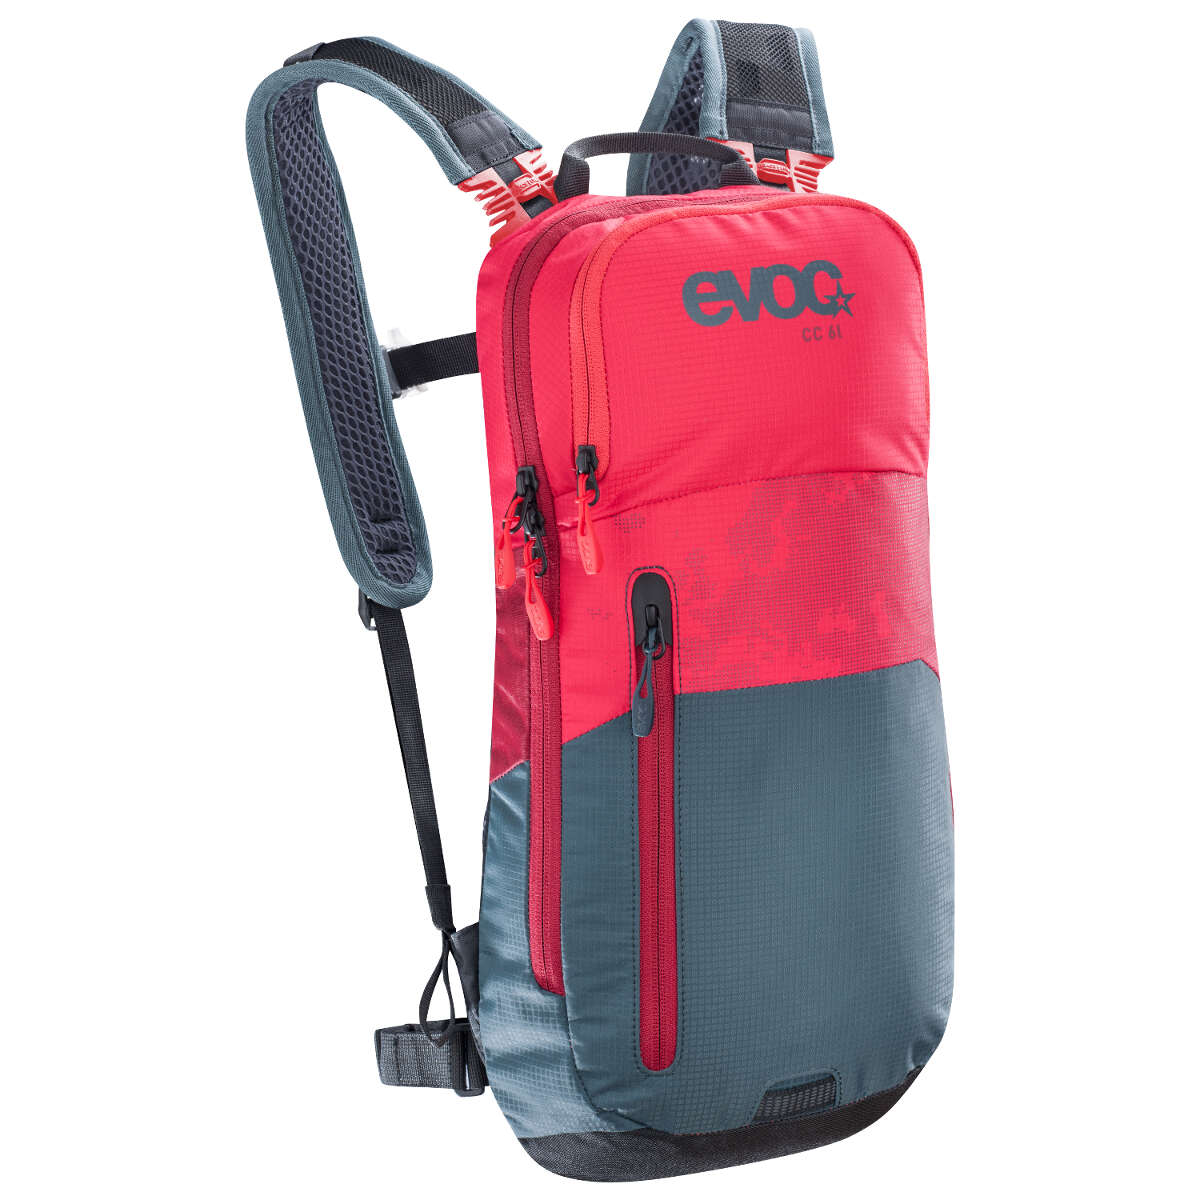 Evoc Backpack with Hydration System Compartment Cross Country Red Slate, 6 Liters